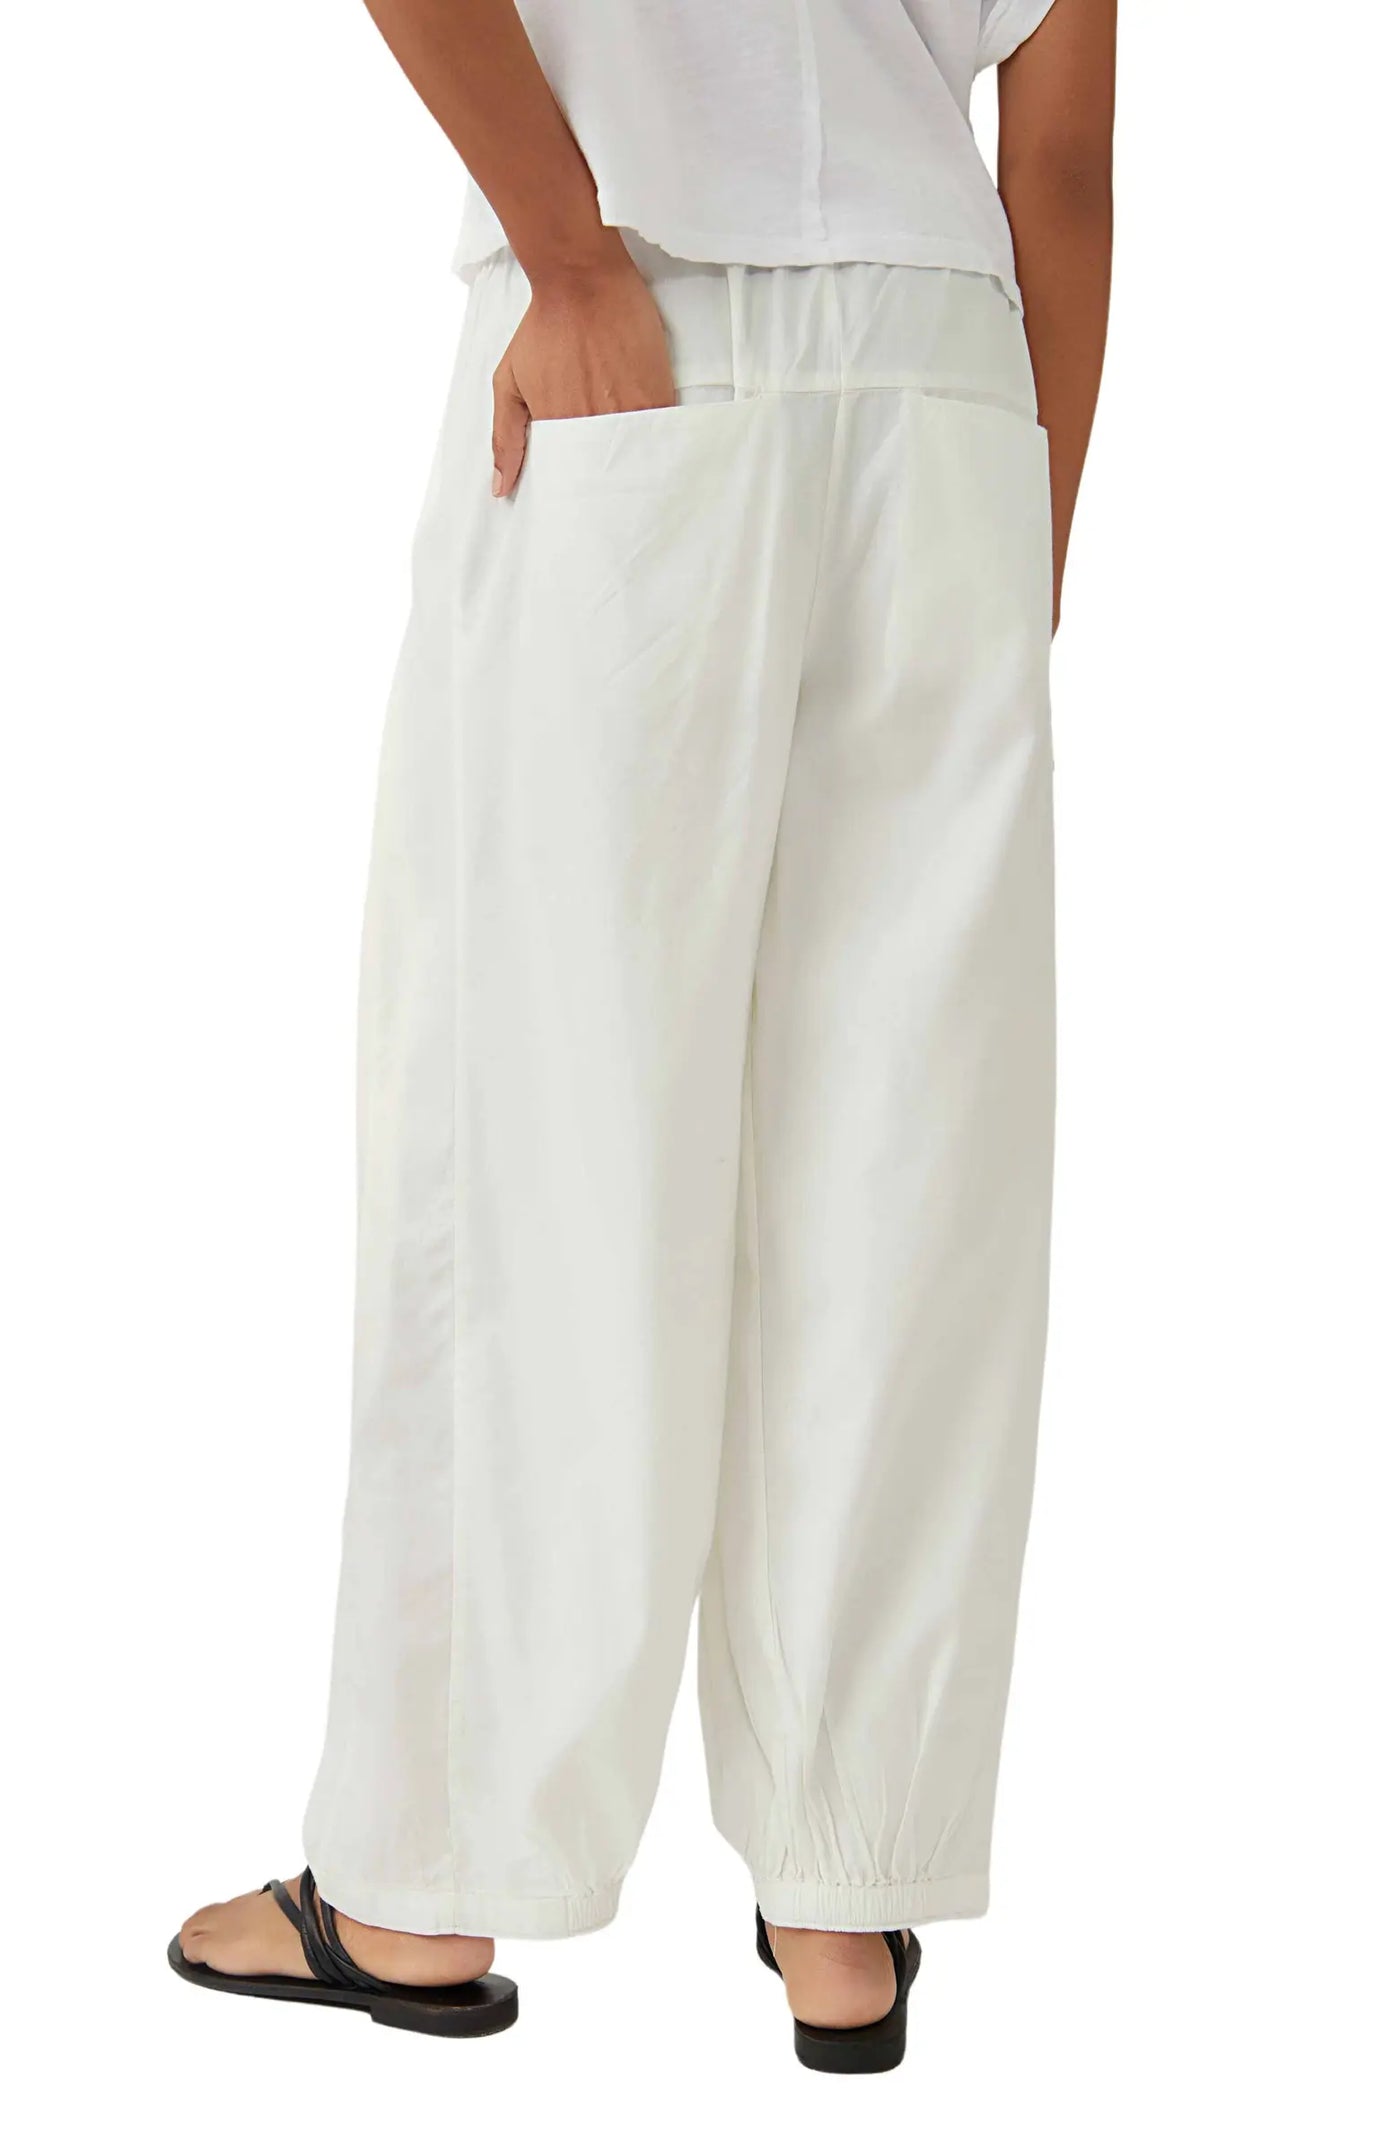 To The Sky Parachute Pant - Madison's Niche 